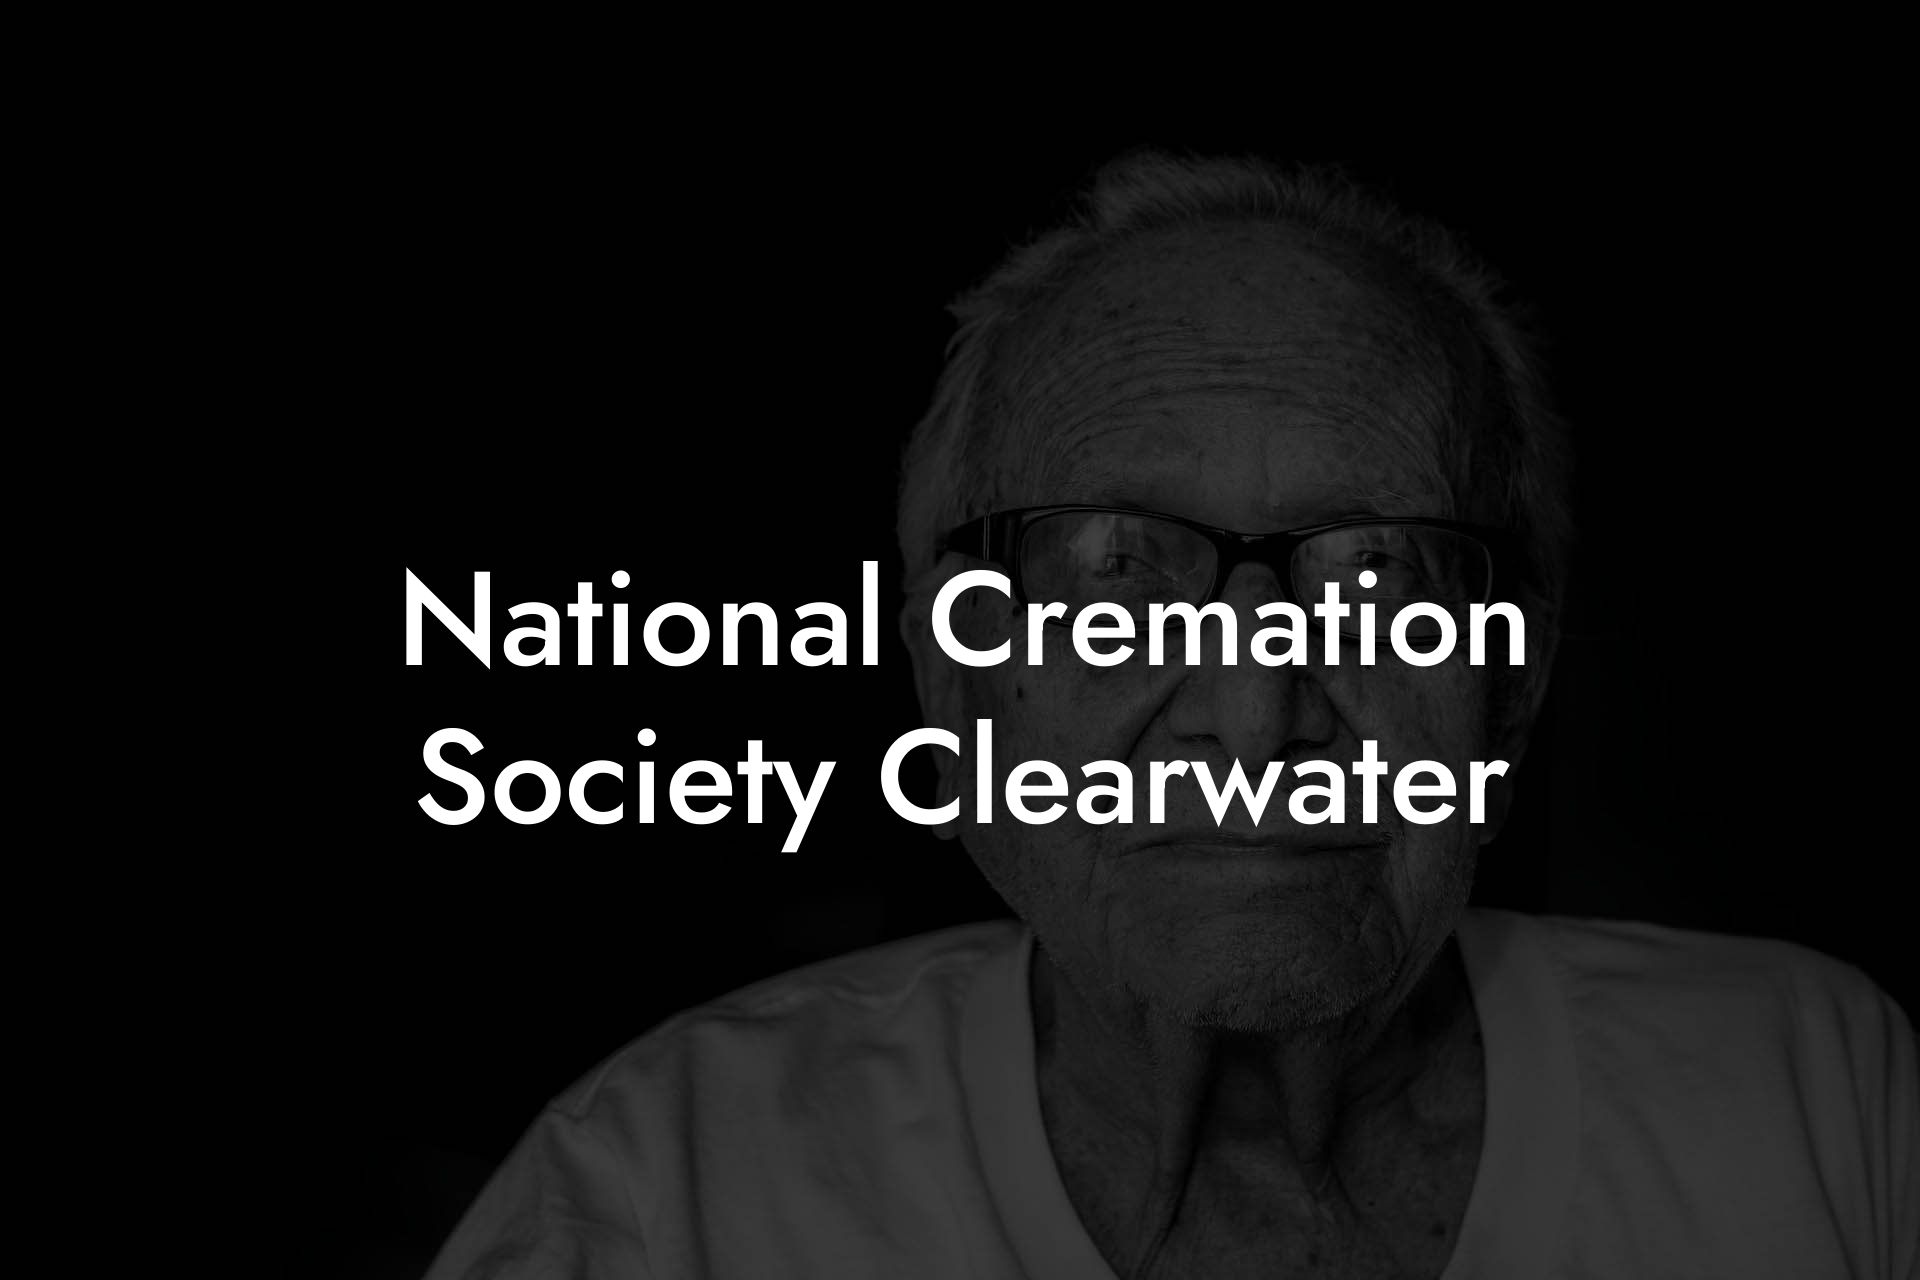 National Cremation Society Clearwater